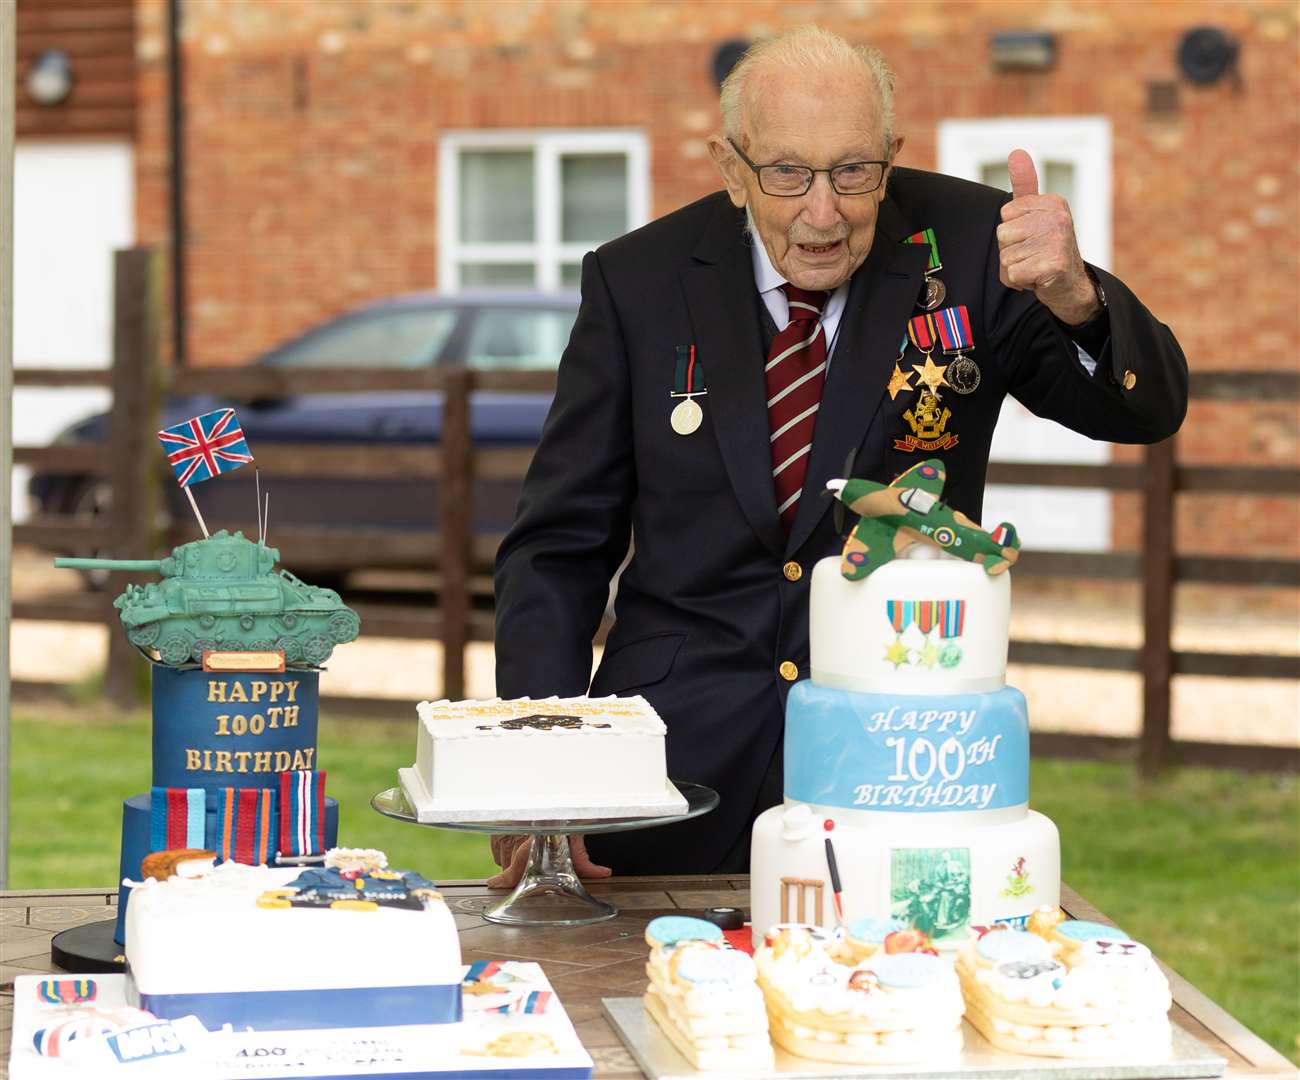 He celebrated his 100th birthday with some impressive-looking cakes (Emma Sohl/Capture the Light Photography/PA)